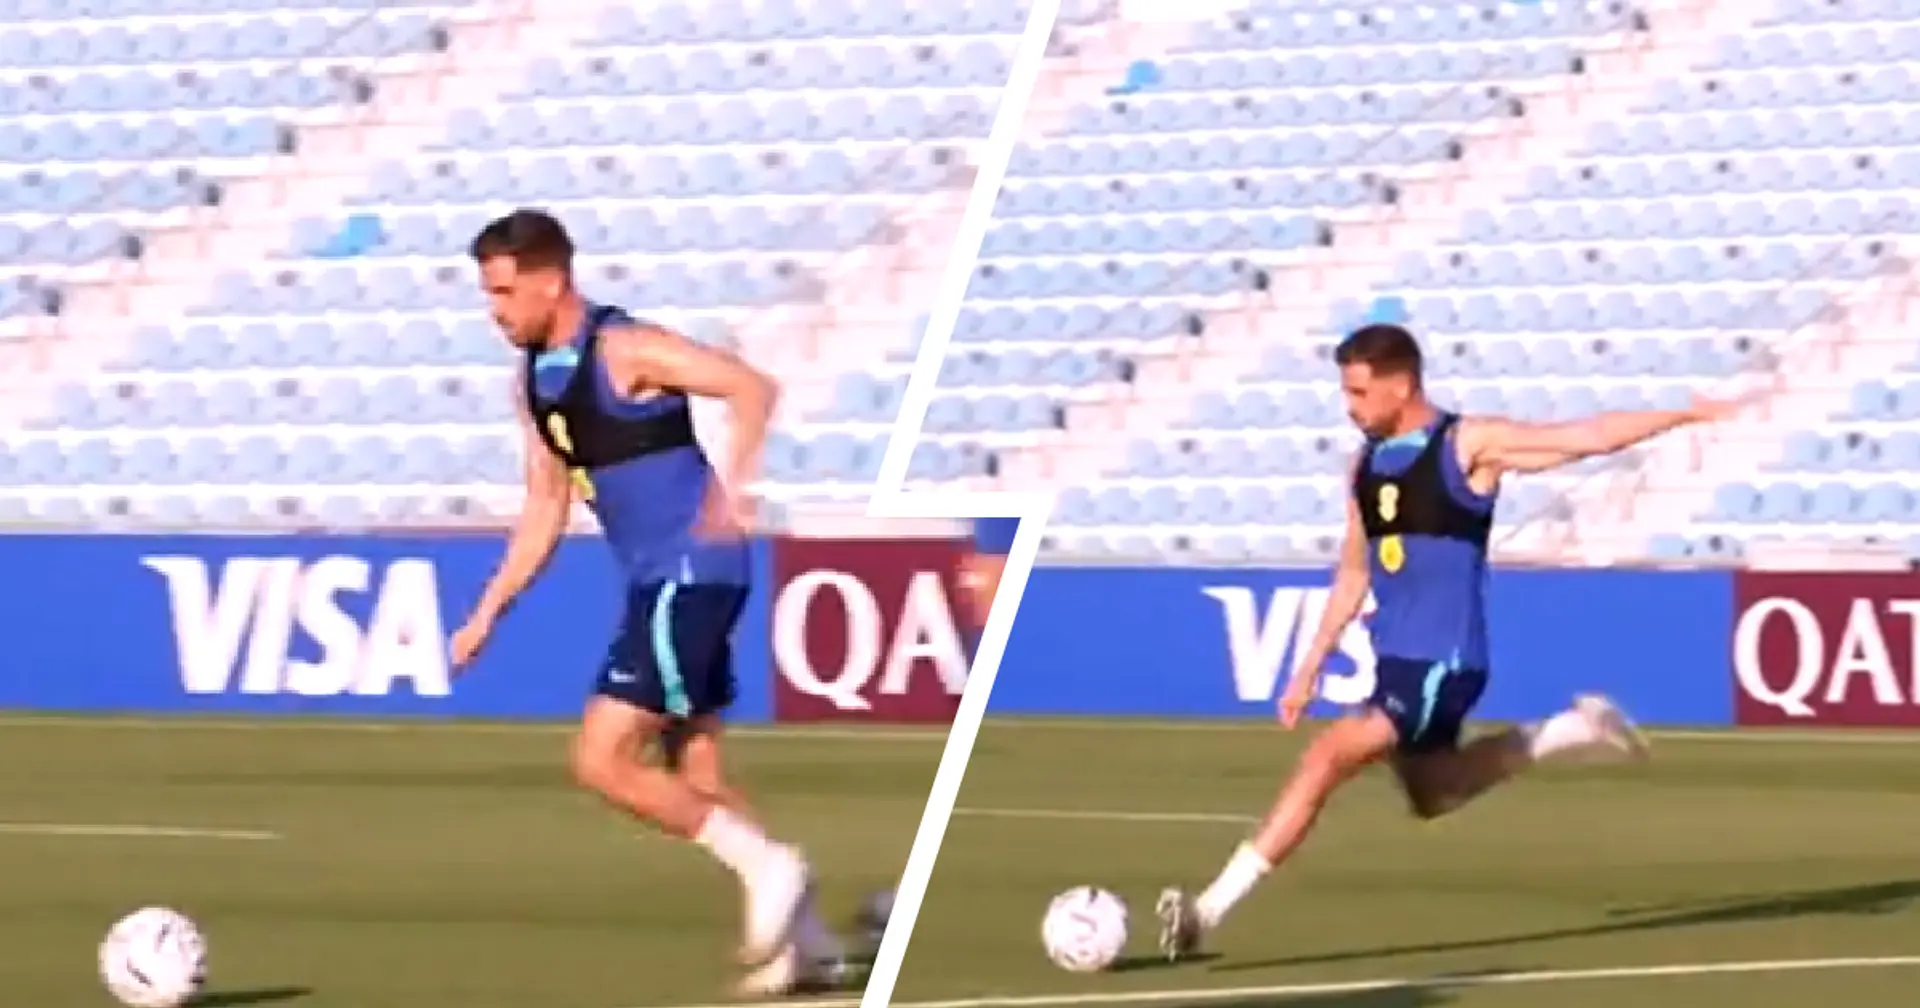 Henderson scores brilliant goal in England training – he's still left out against USA